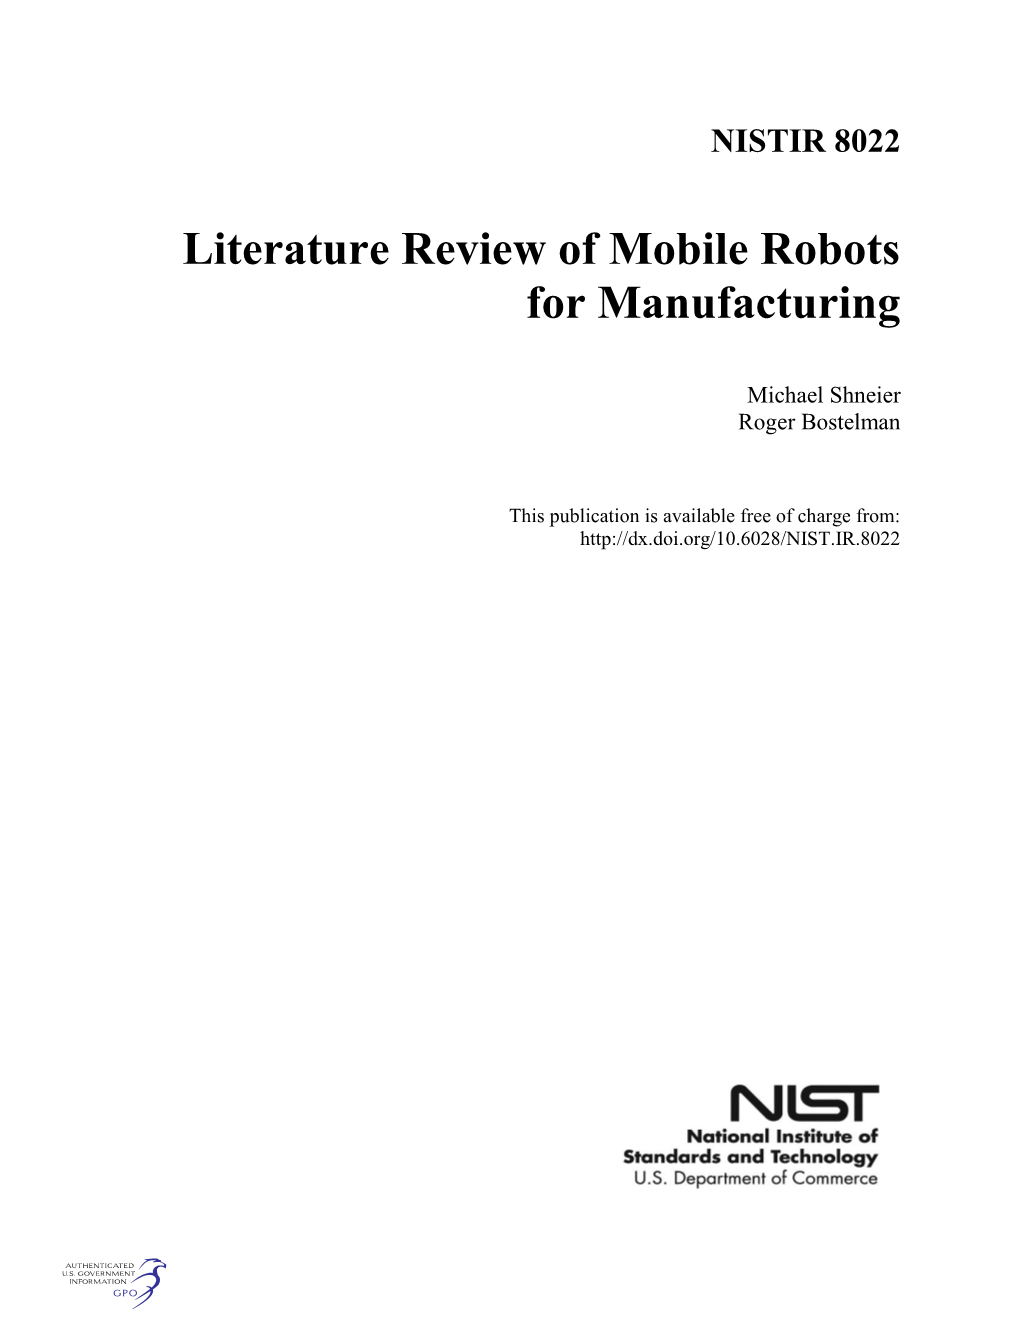 Literature Review of Mobile Robots for Manufacturing